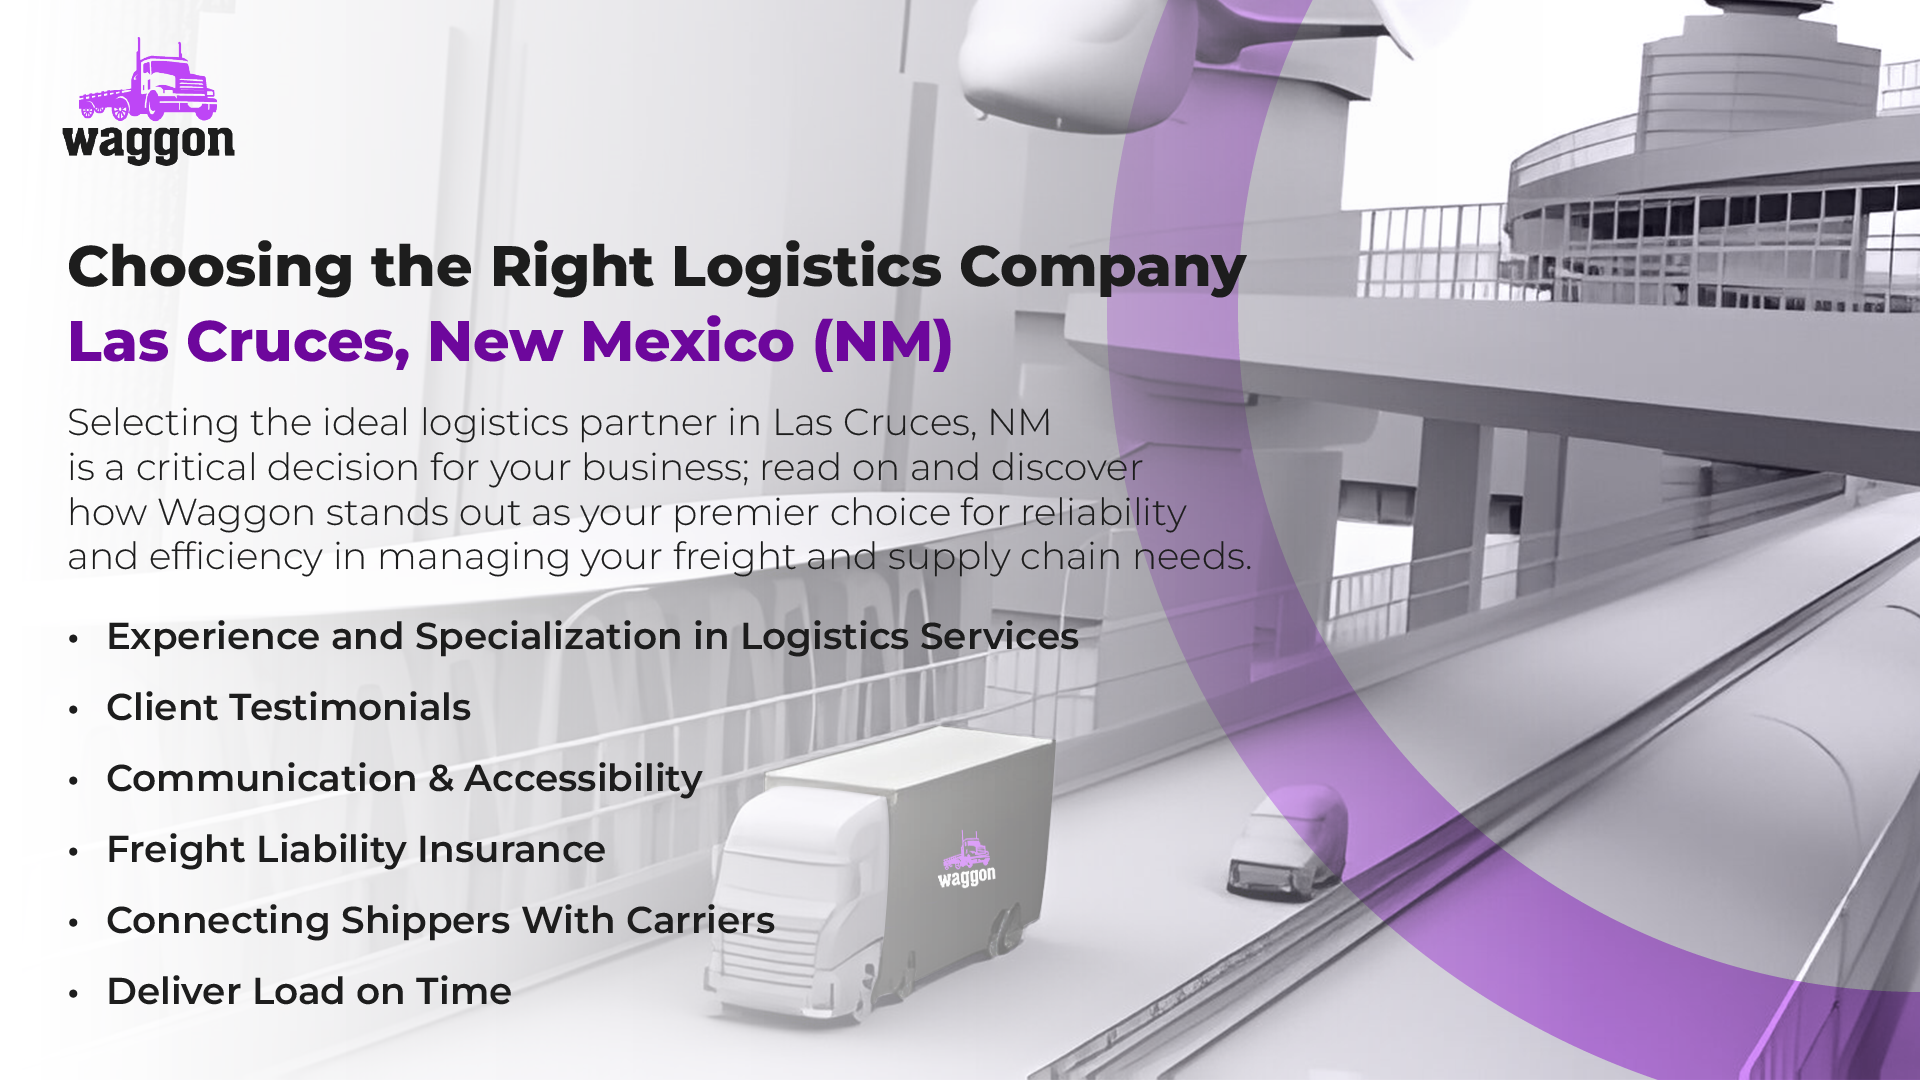 Choosing the Right Logistics Company in Las Cruces, New Mexico (NM)